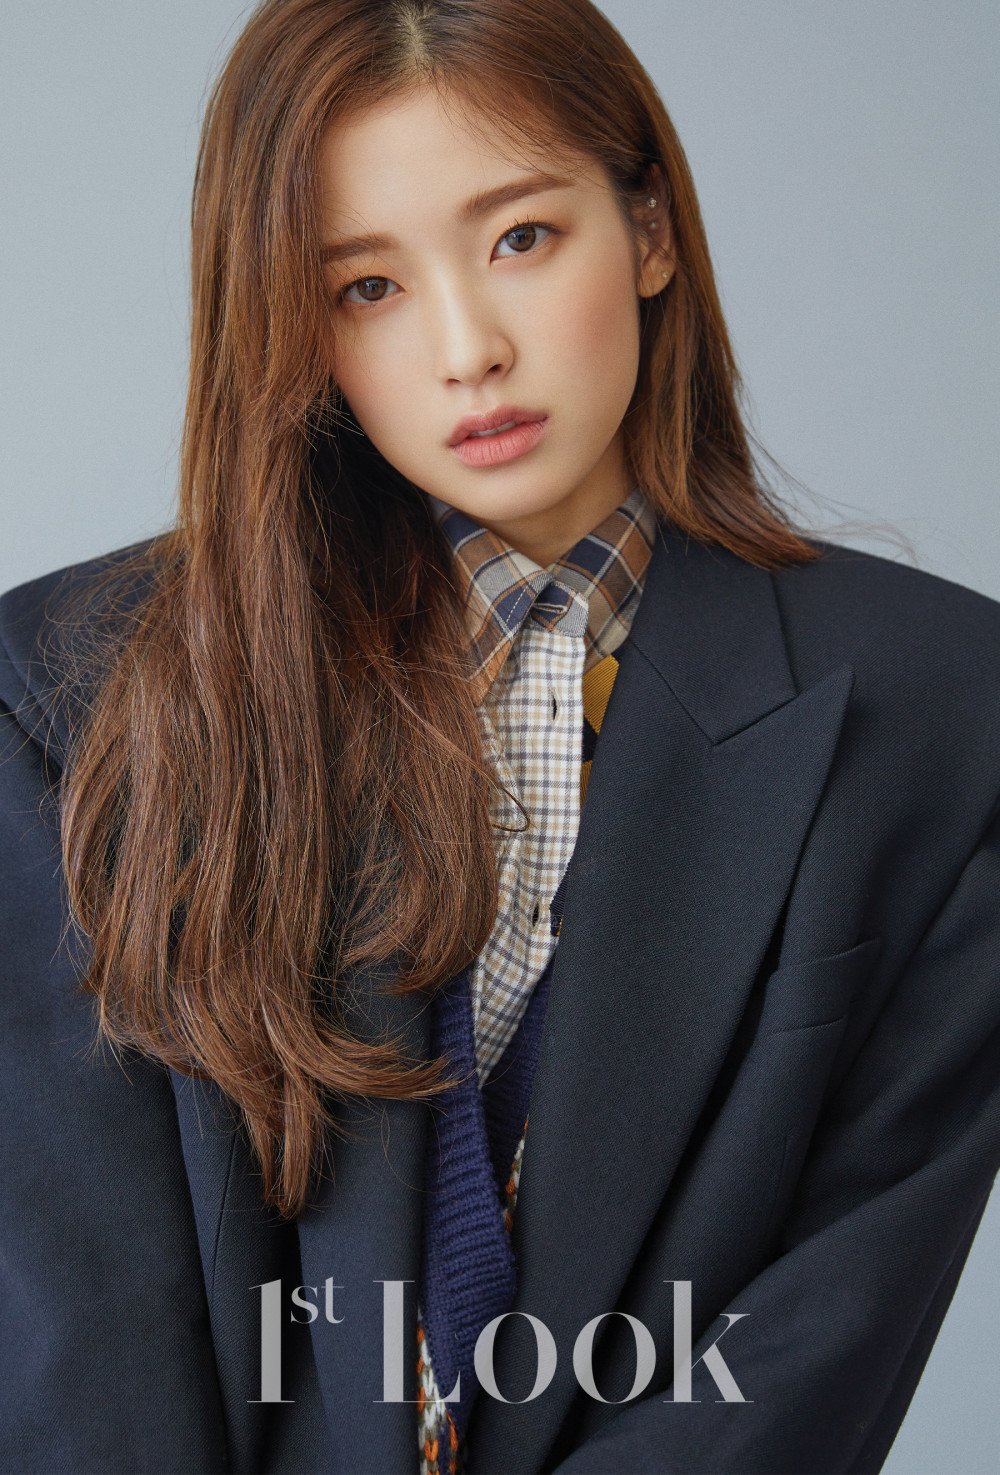 Oh My Girl's Arin Shows Matured and Elegant Side for 1st Look Magazine Photo Shoot